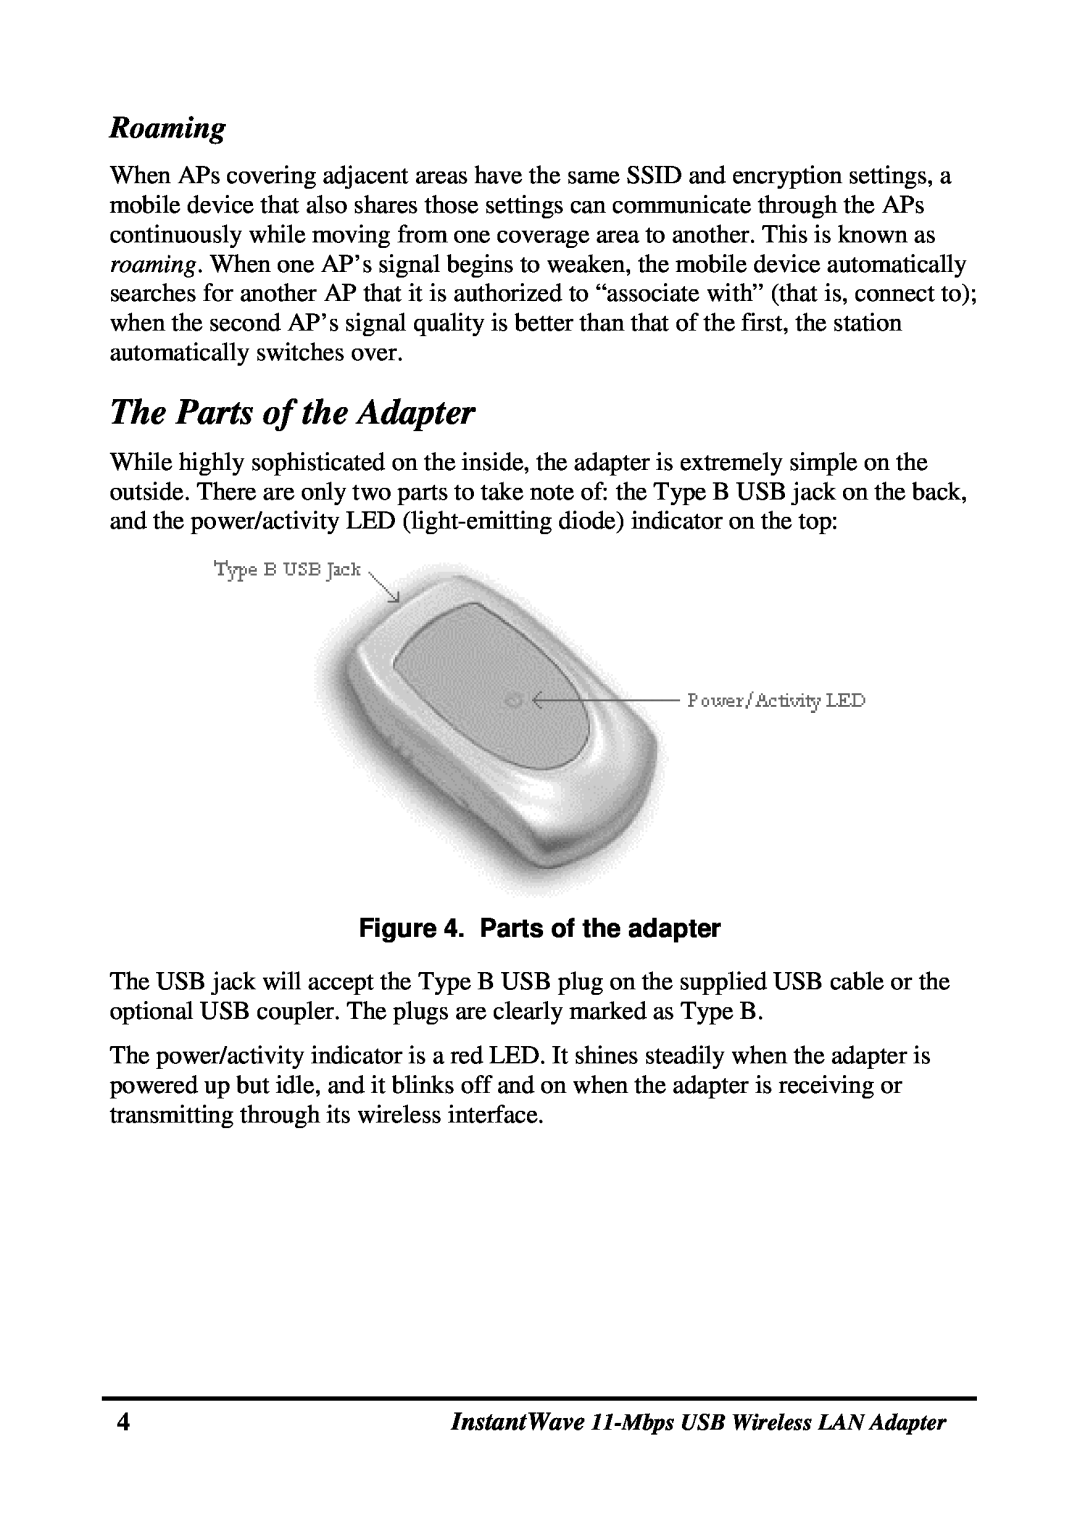 NDC comm NWH4020 manual The Parts of the Adapter, Roaming, Parts of the adapter 